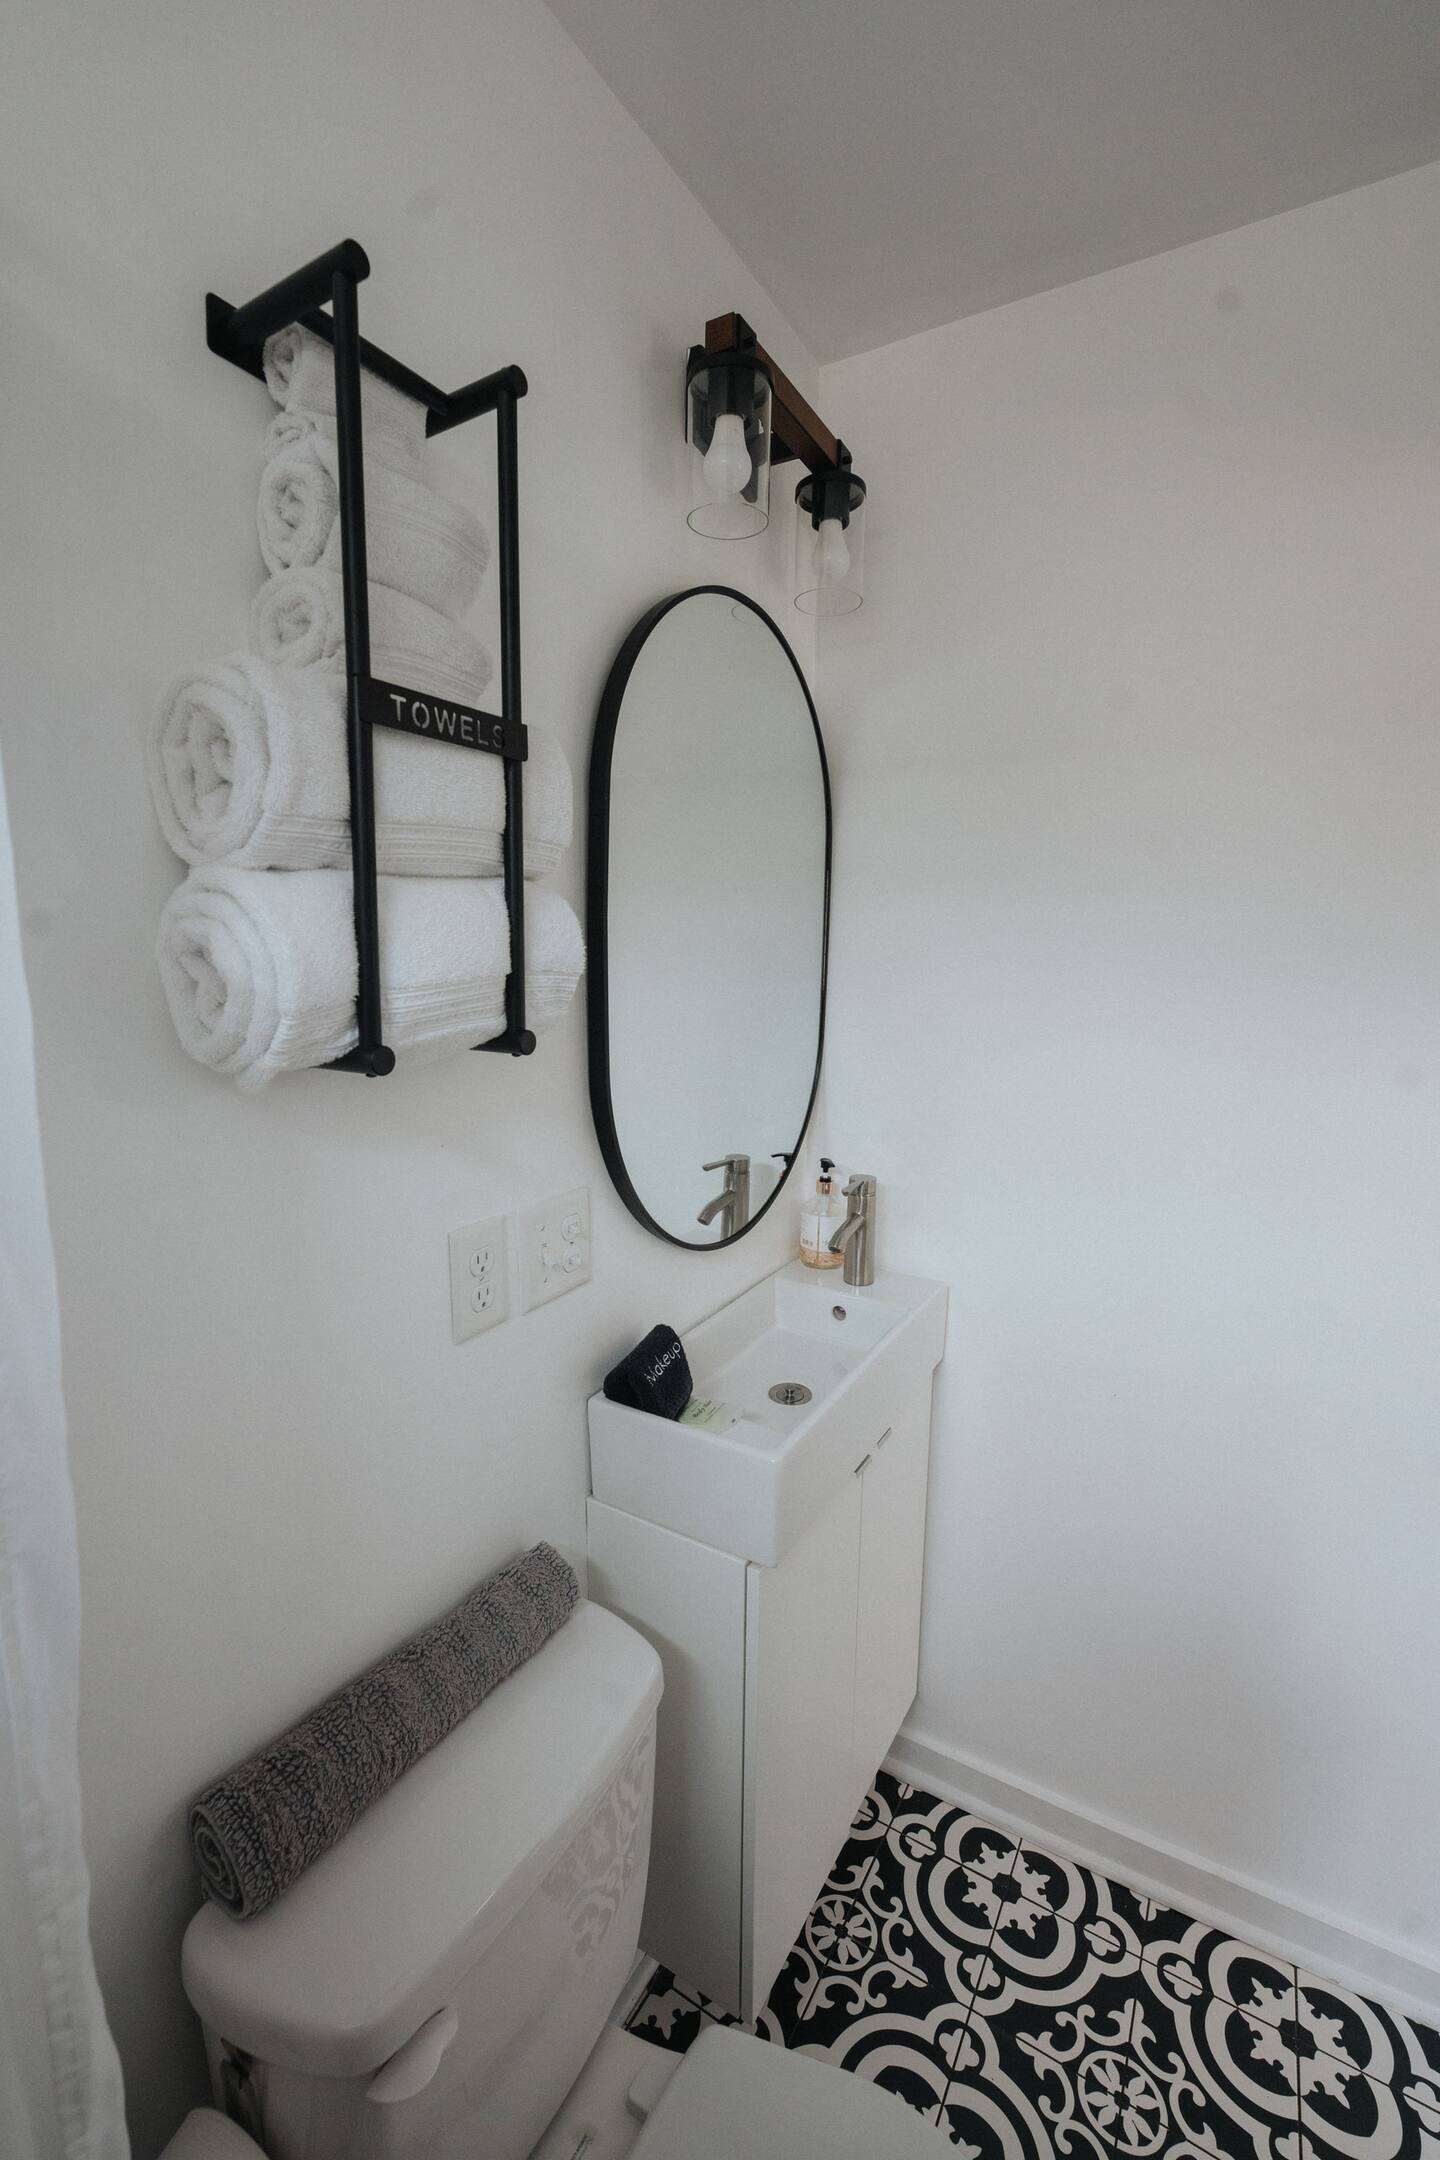 Black details in white toillette with a retro tiles and small sink